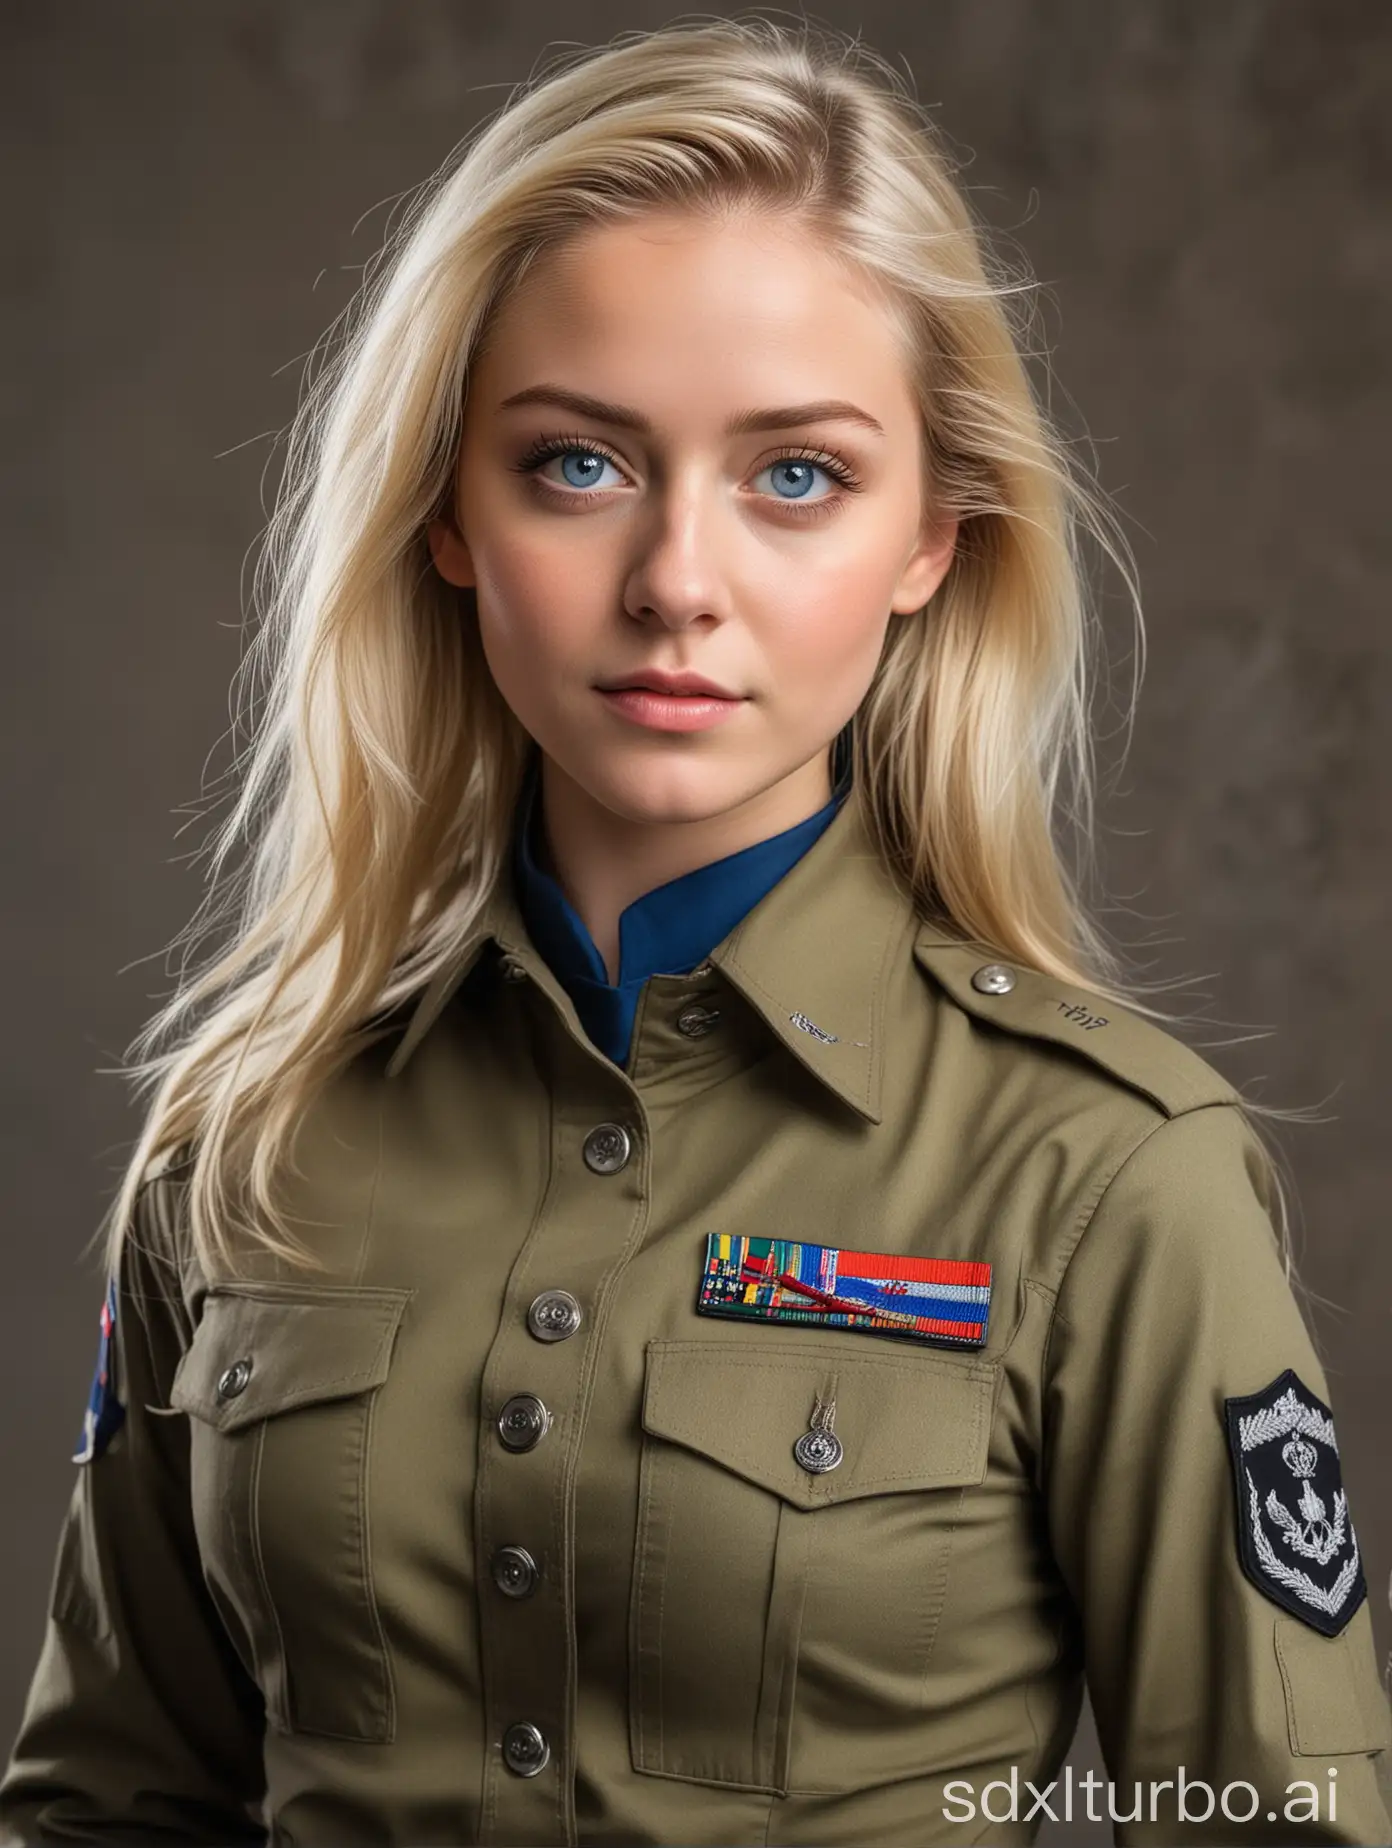 Blonde girl with blue eyes in a military uniform clinging to her body, skirt, and neckline